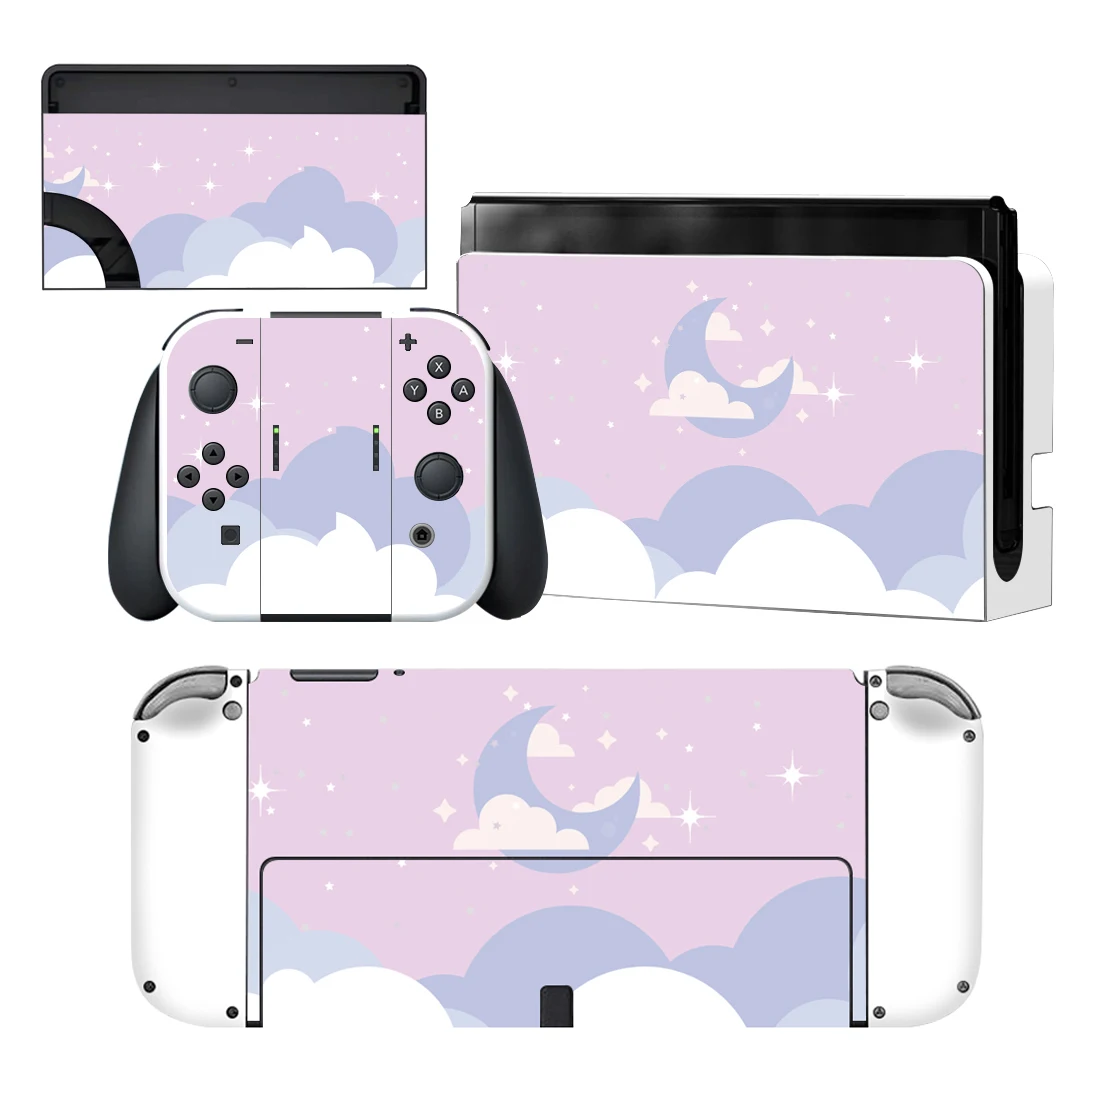 

Starry Sky Star Nintendoswitch Skin Cover Sticker Decal for Nintendo Switch OLED Console Joy-con Controller Dock Skin Vinyl